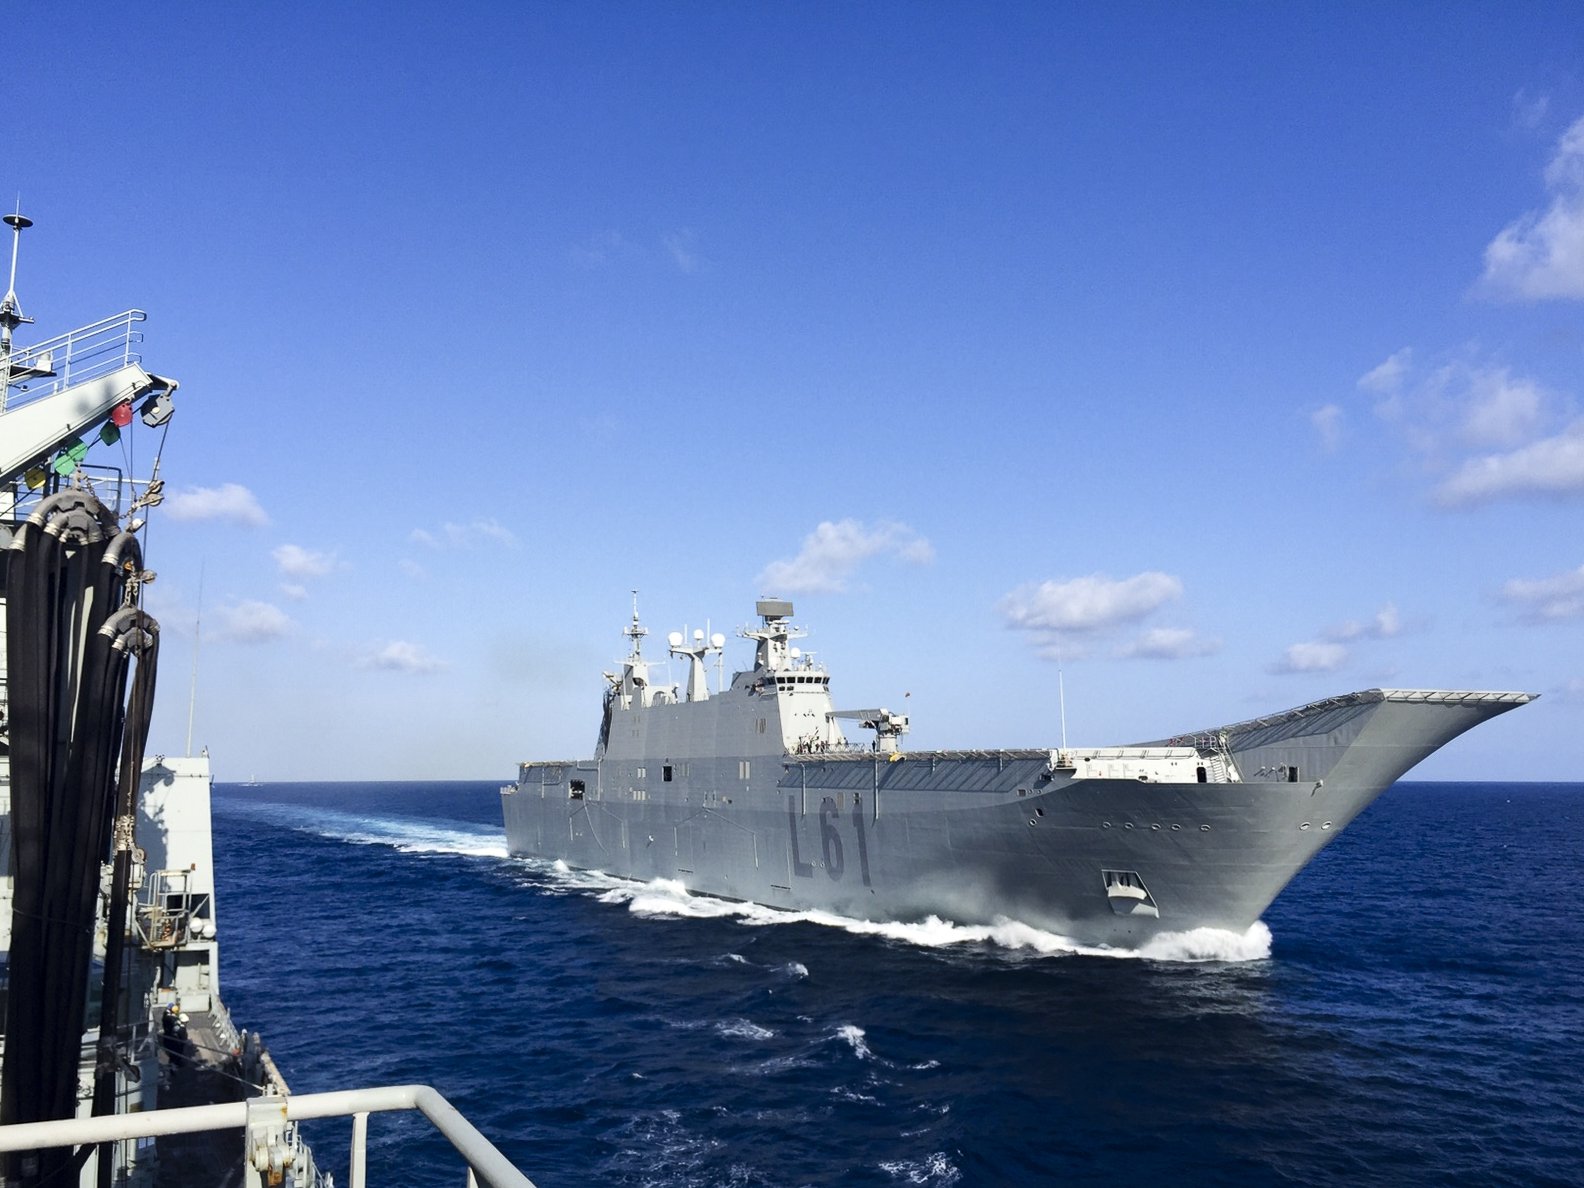 The Spanish Juan Carlos ship is seen in this photo provided on Feb. 7, 2023. (Photo: Defensagob)